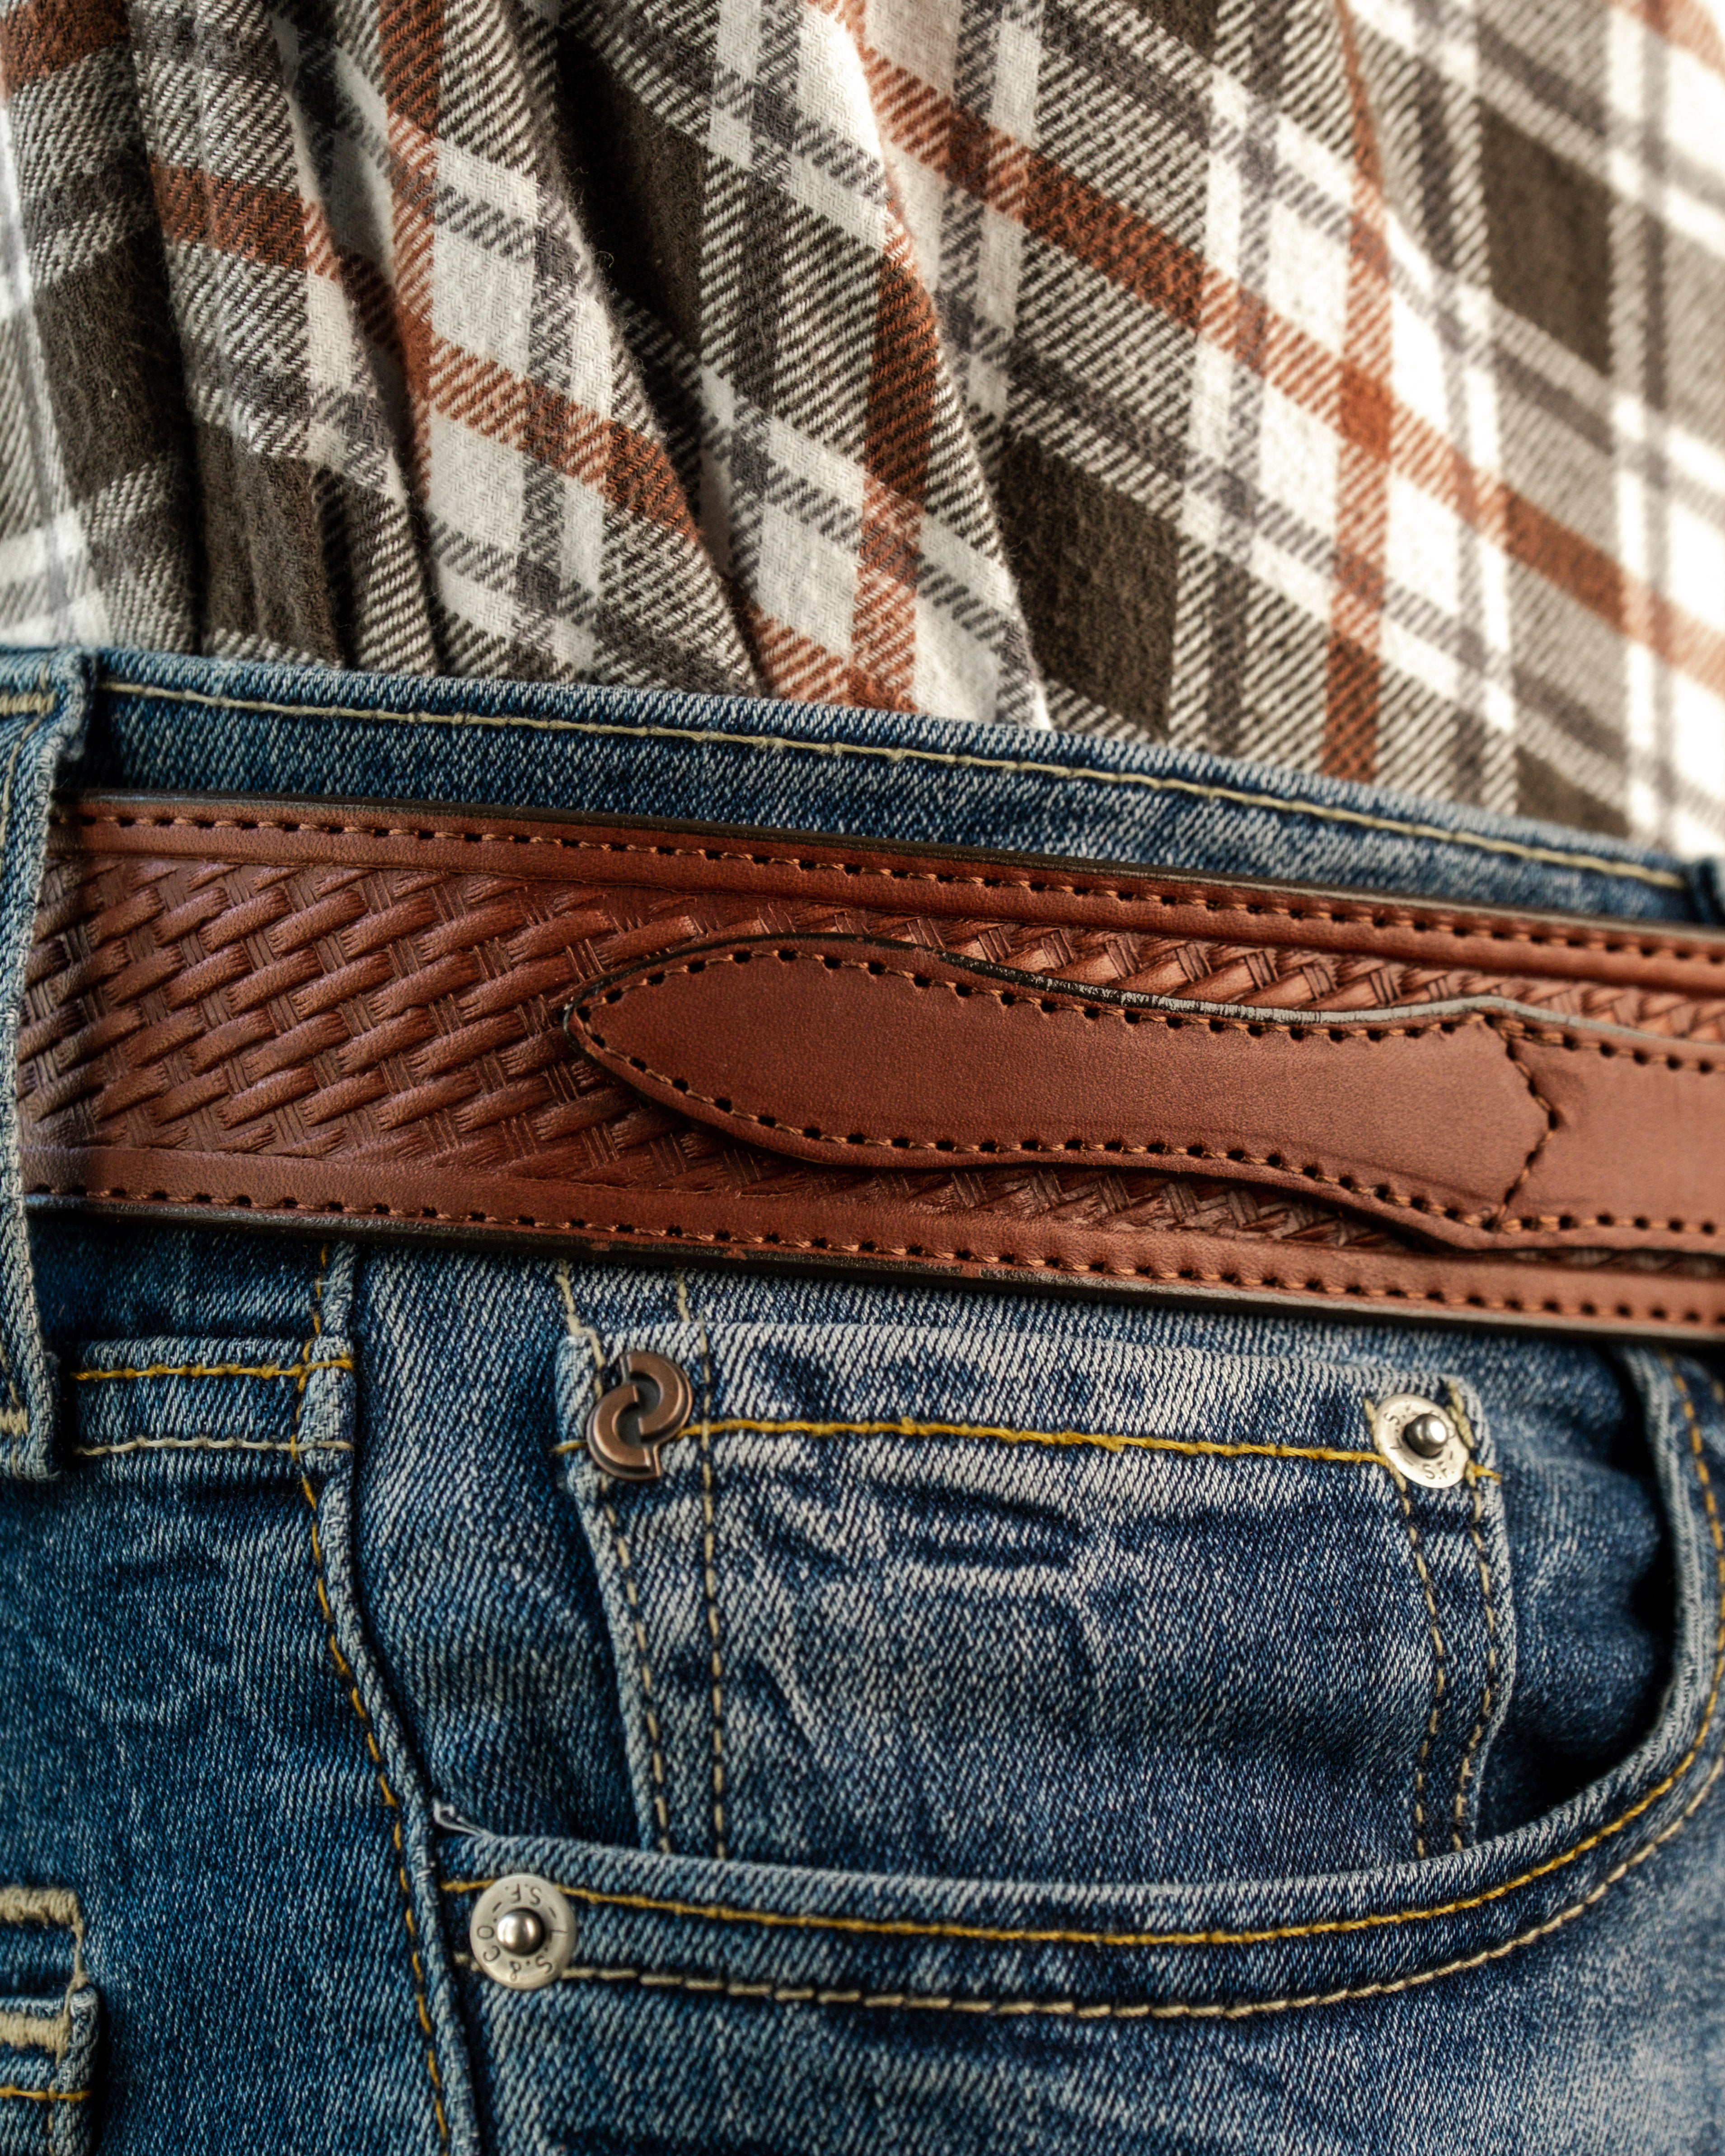 Western Leather Ranger Belt - Made in the USA